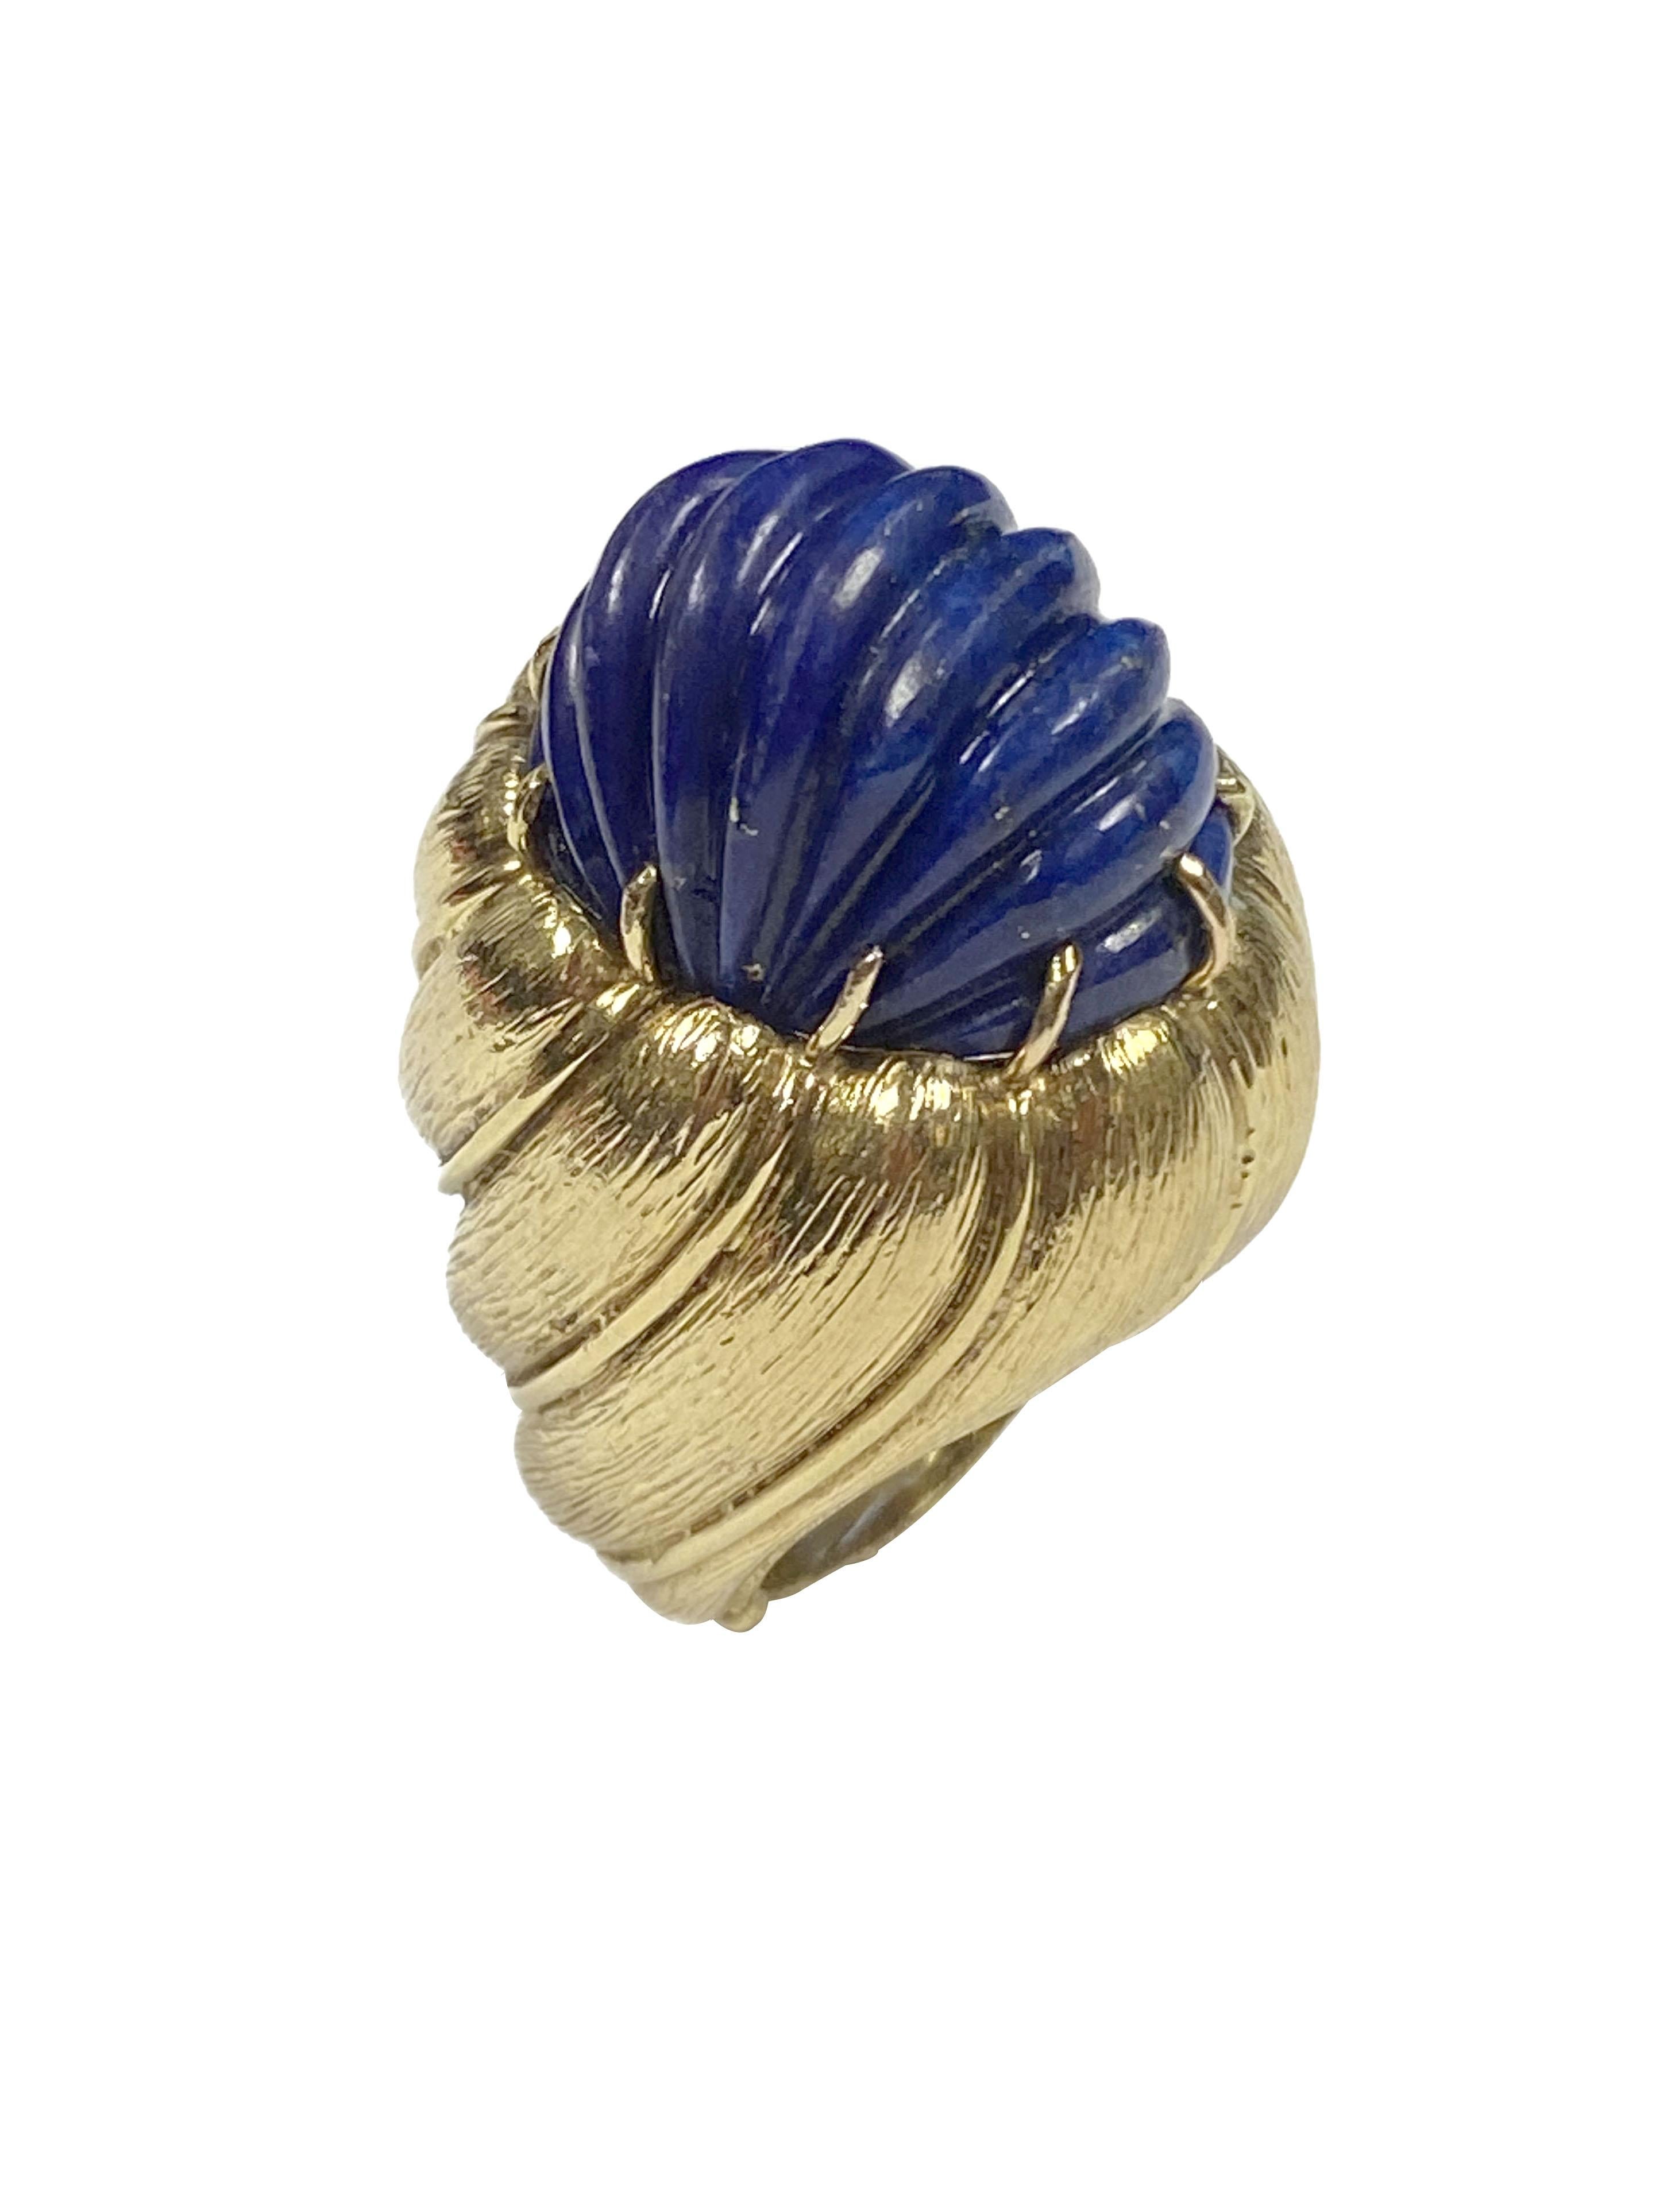 Cabochon Vintage Large and Impressive Yellow Gold and Lapis Scalloped Dome Ring